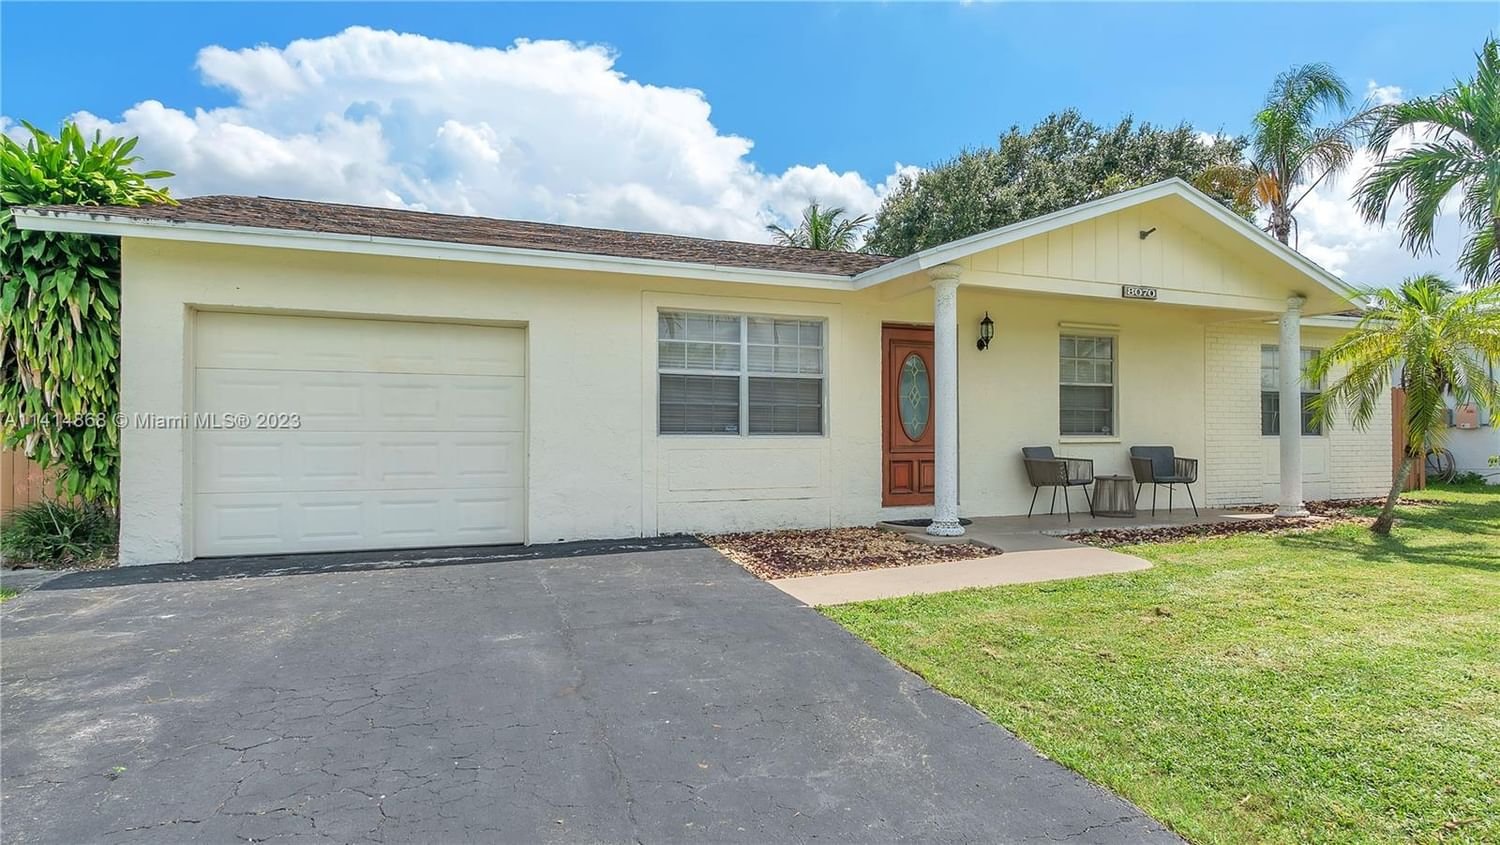 Real estate property located at 8070 47th St, Broward County, Lauderhill, FL